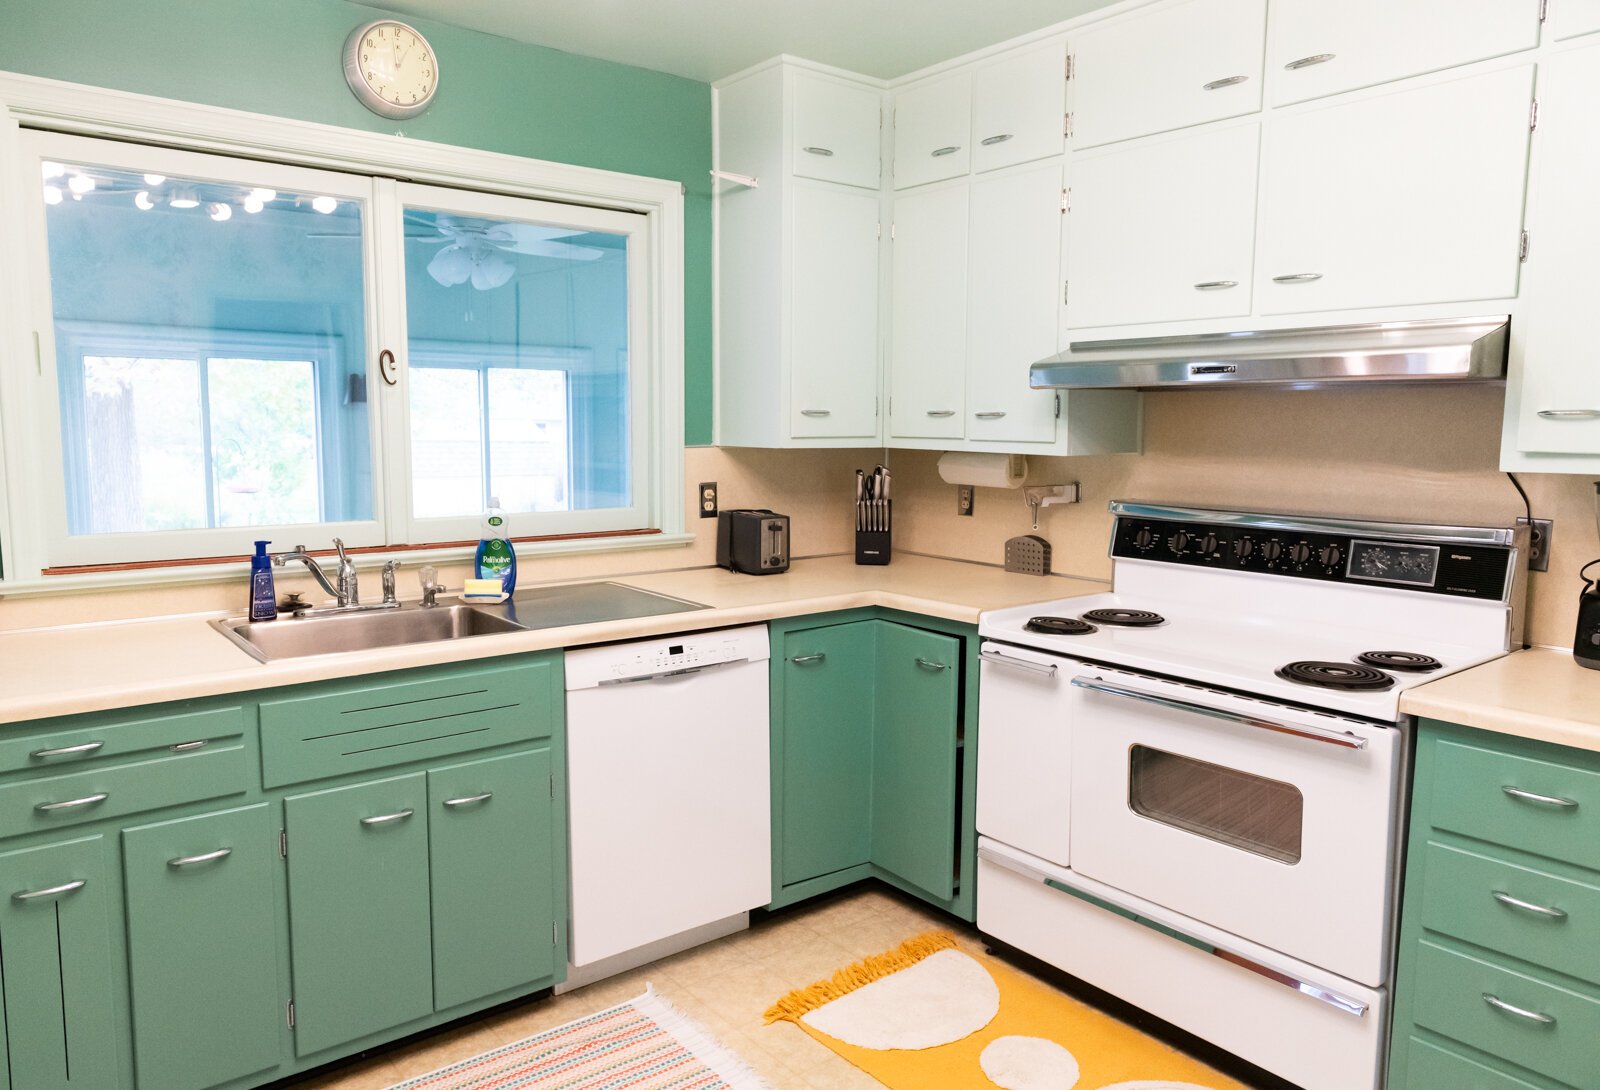 The kitchen feature mint green cabinets.